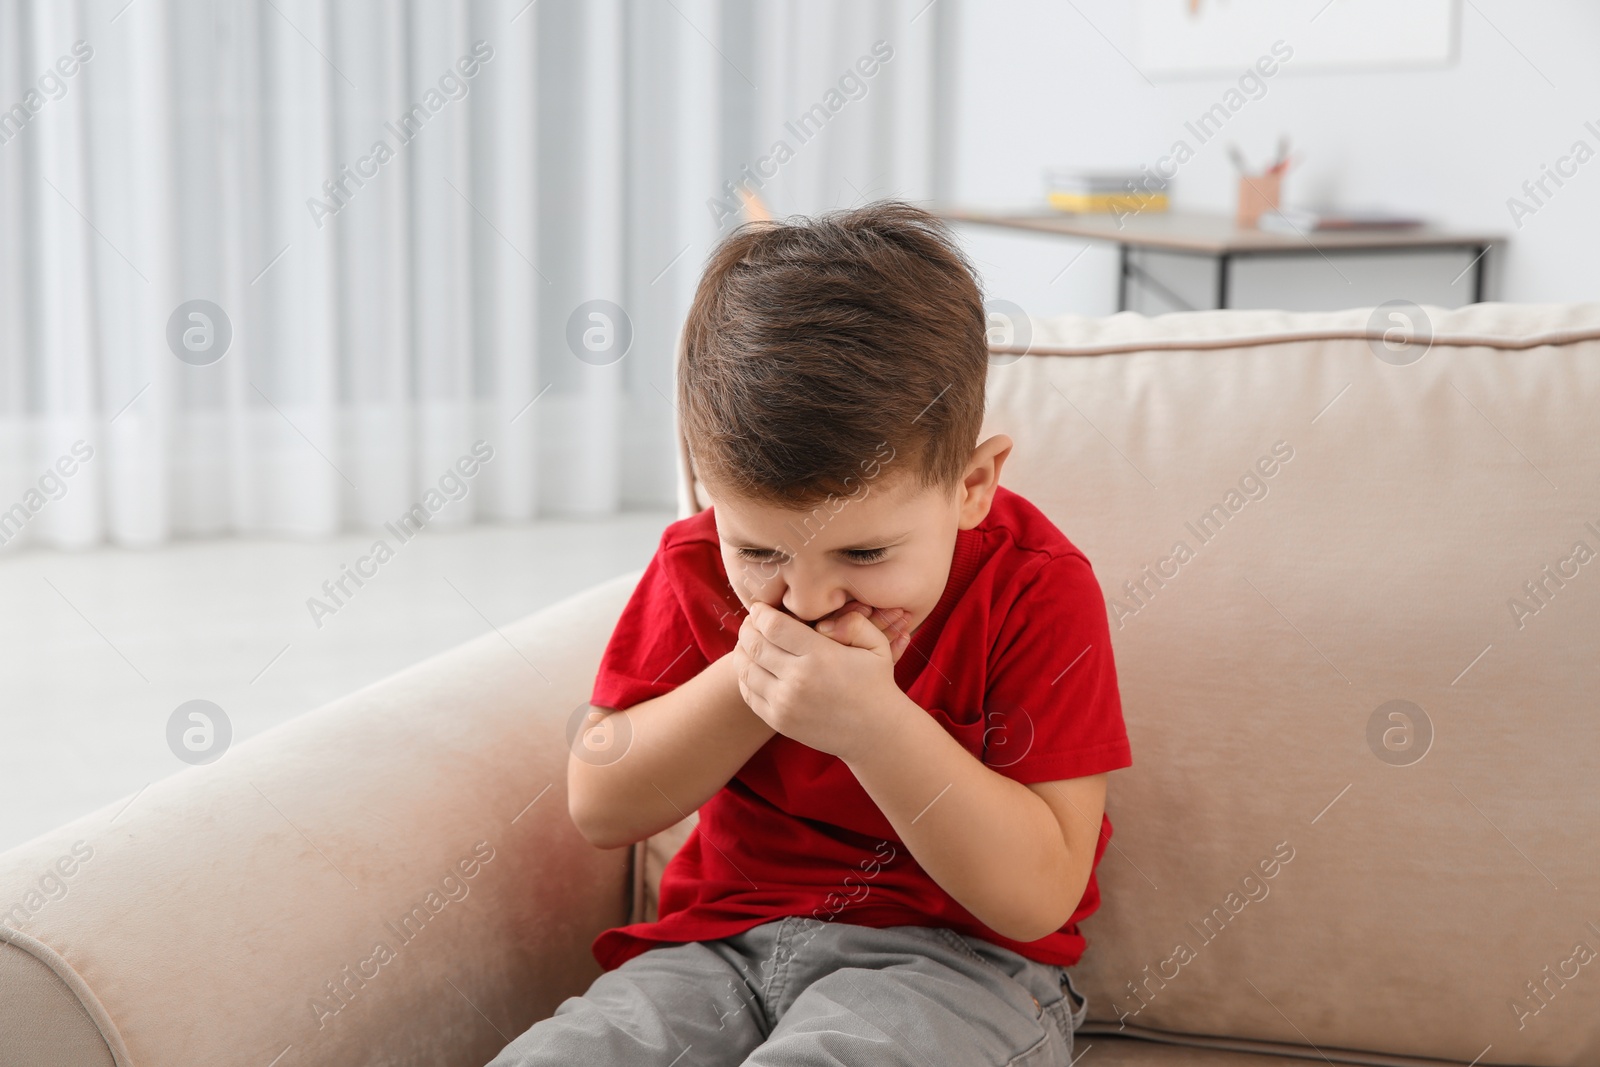 Photo of Little boy suffering from nausea in living room